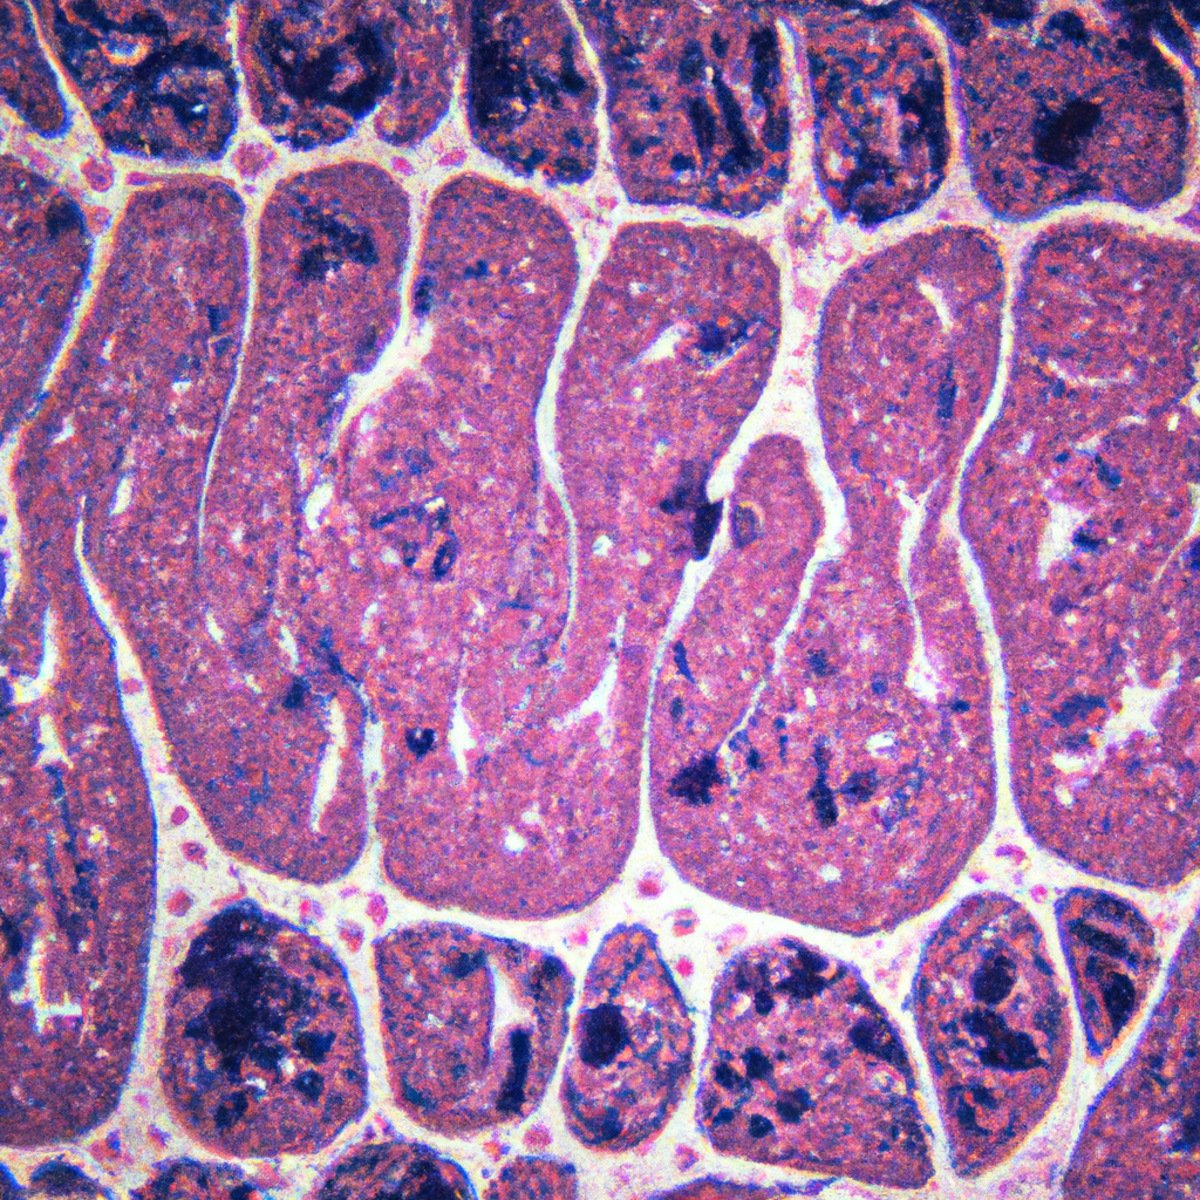 Vibrant and intricate pattern of Gastrointestinal stromal tumor (GIST) cells on microscope slide